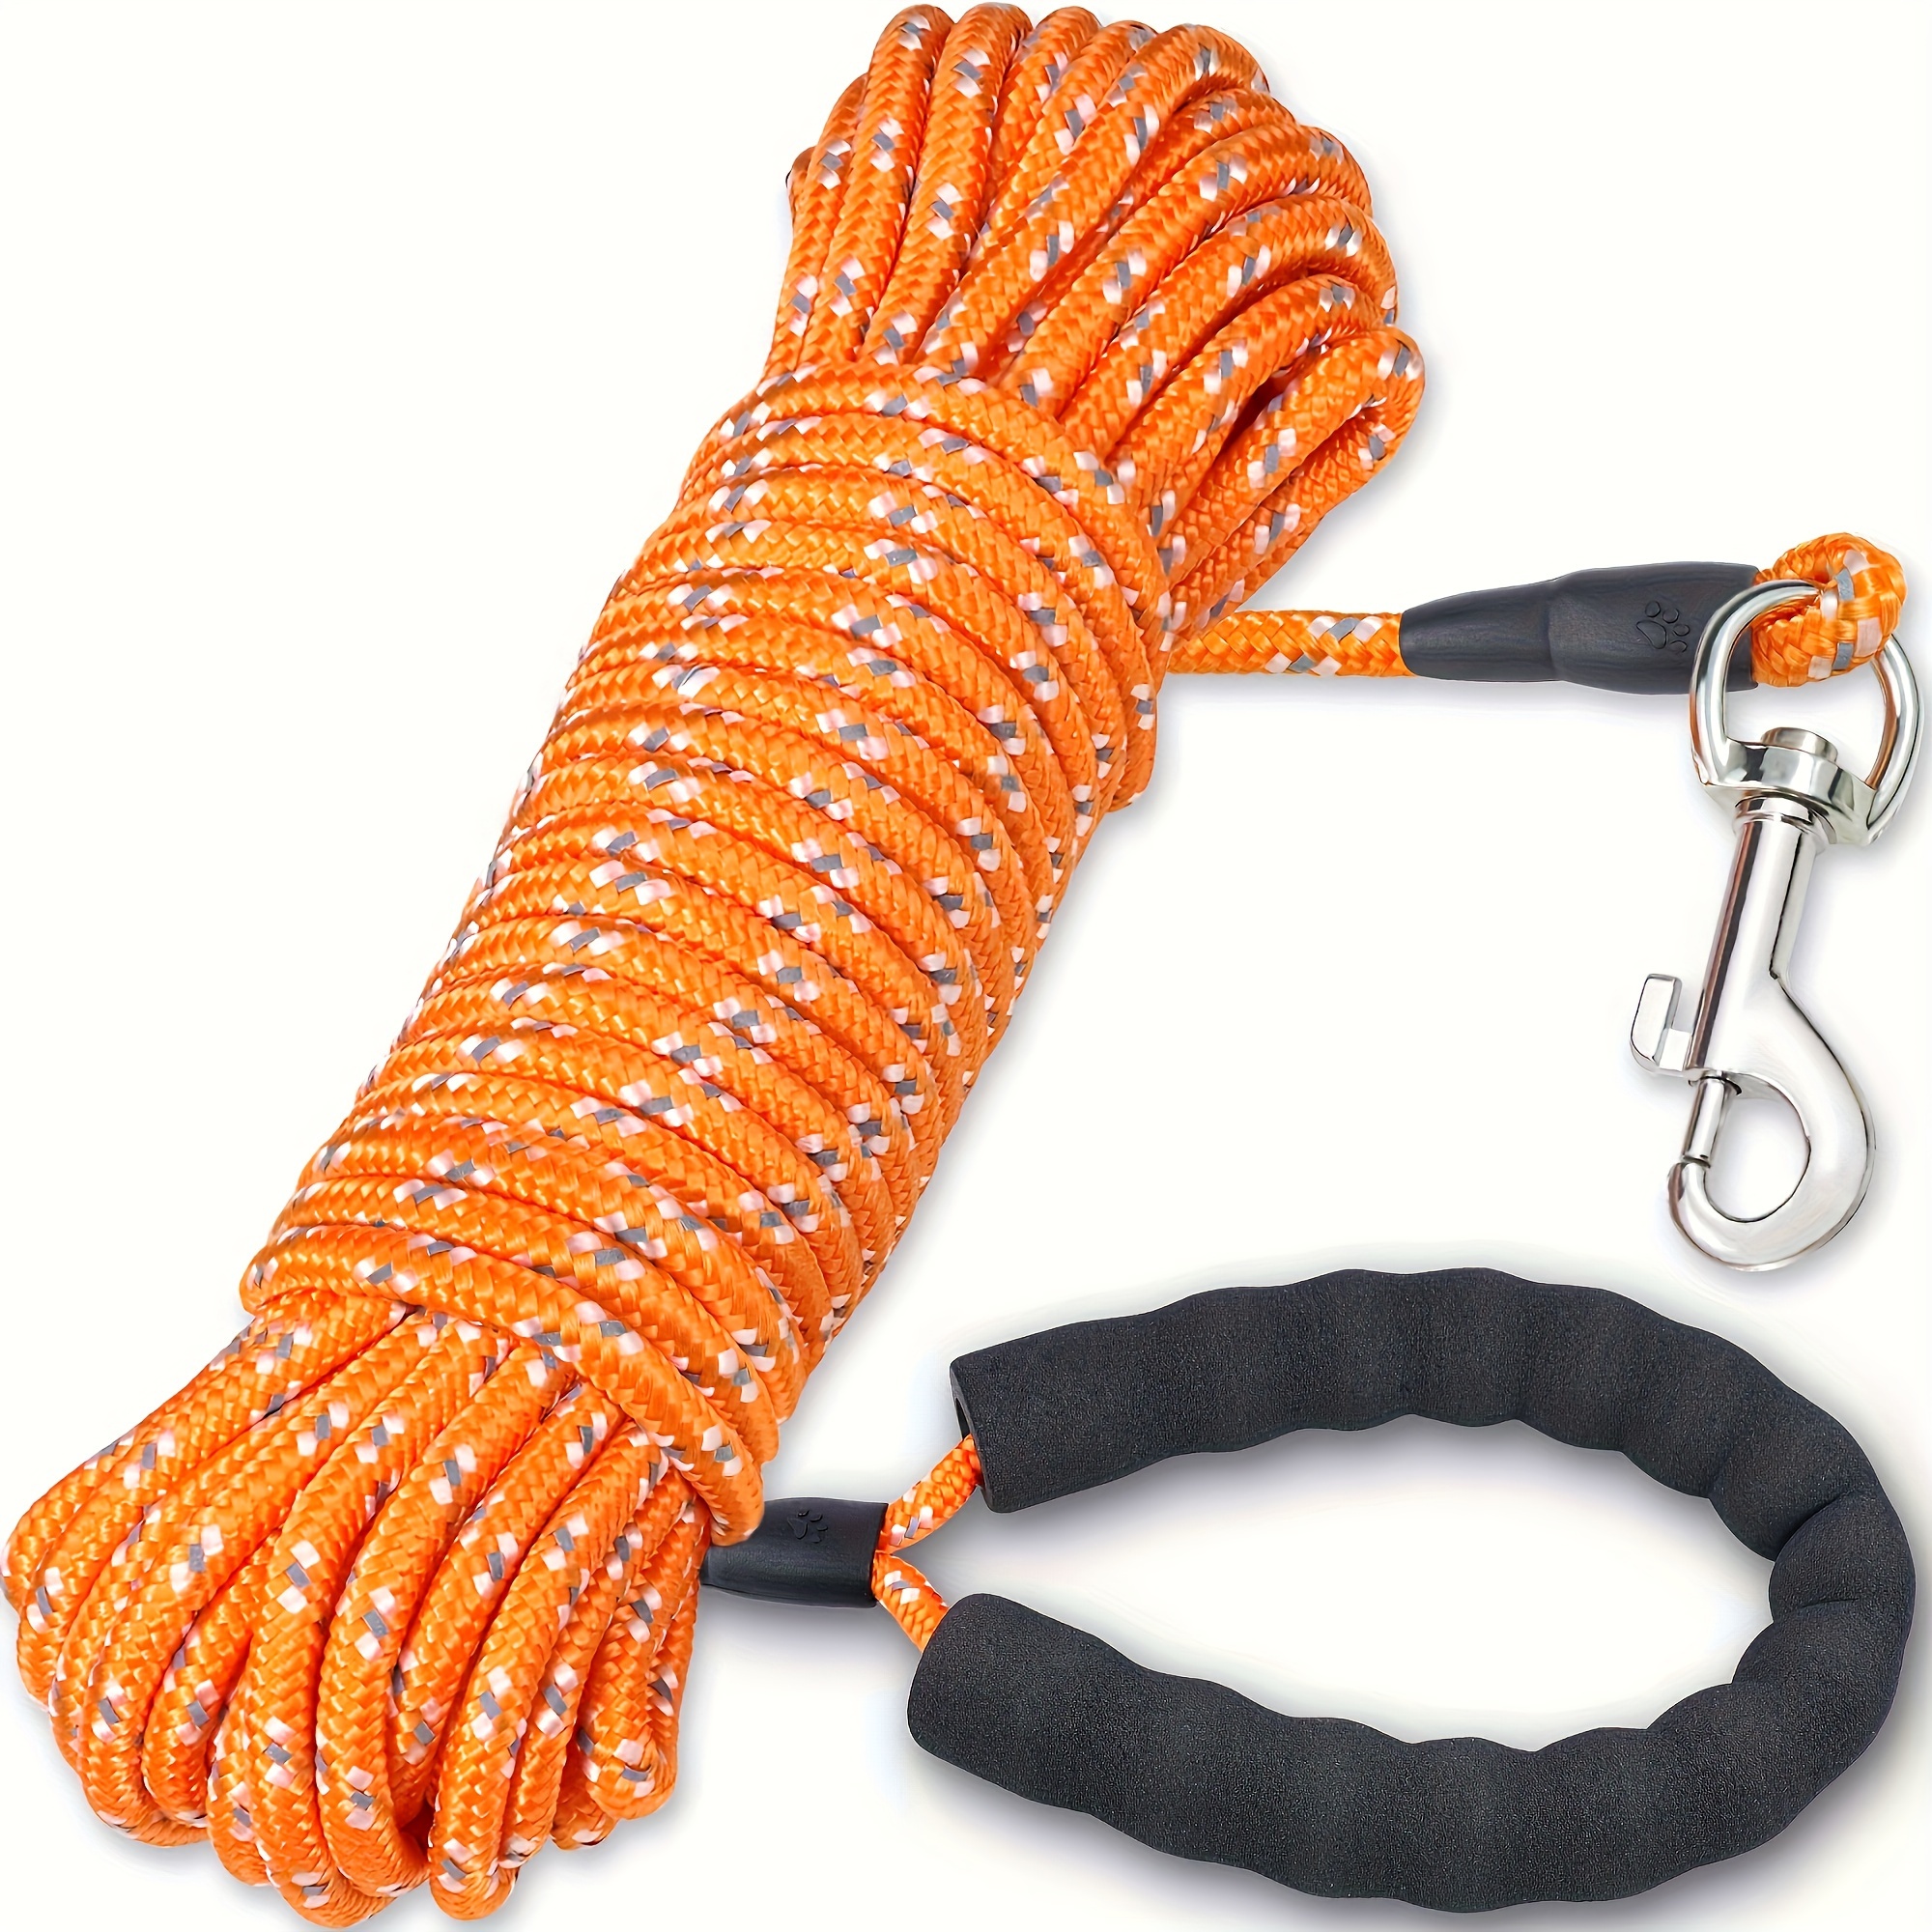 

Dog Training Leash, Heavy-duty Reflective Inspection Rope Recall Leash, Suitable For Dog Training And Playing